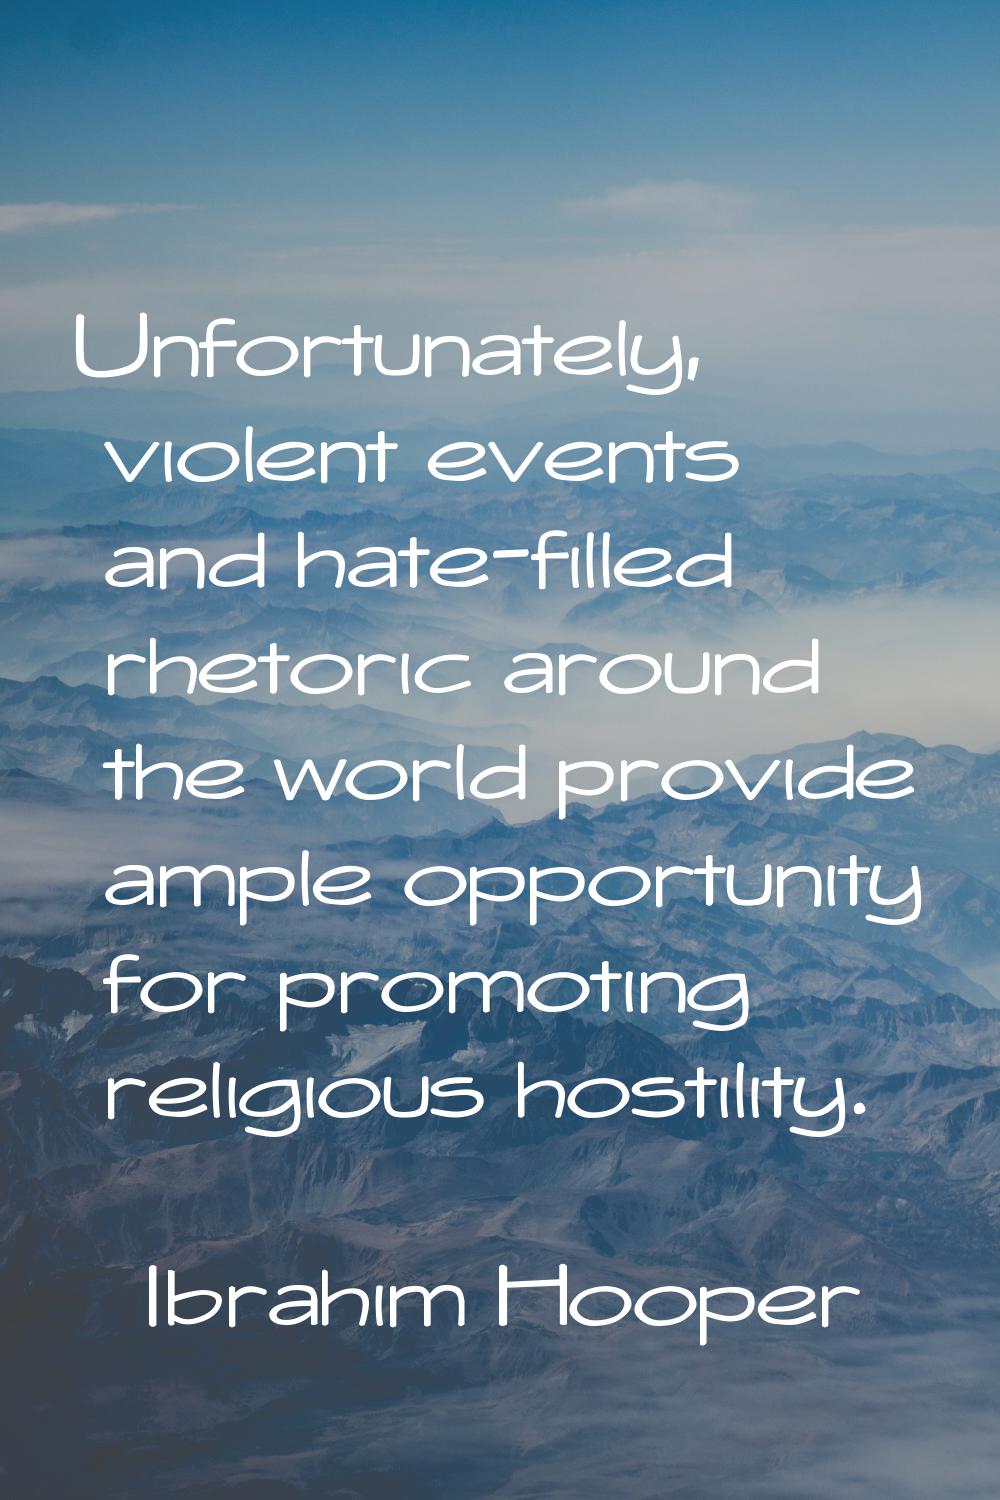 Unfortunately, violent events and hate-filled rhetoric around the world provide ample opportunity f